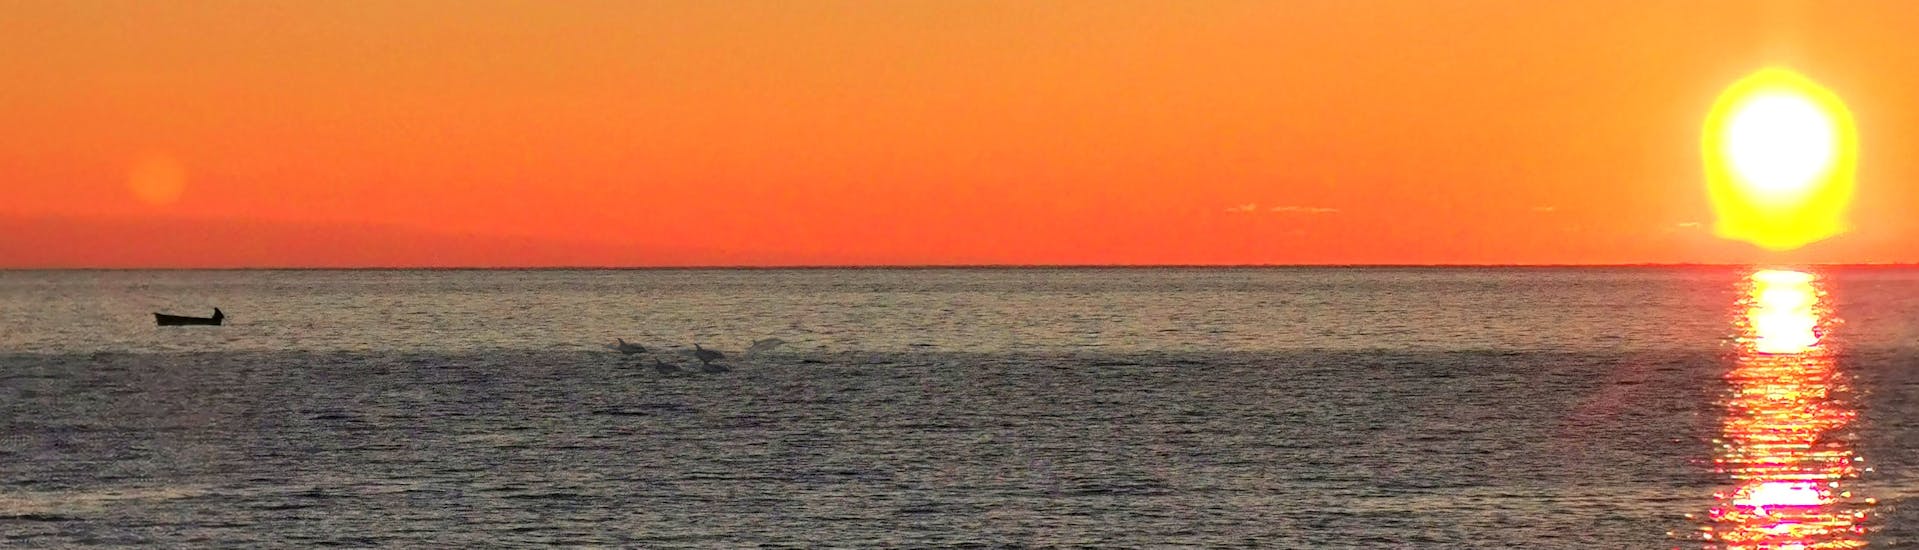 Dolphins are swimming and jumping in the middle of the sunset during the Sunset Boat Trip around Vrsar with Dolphin Watching with Lidija Tours Vrsar.